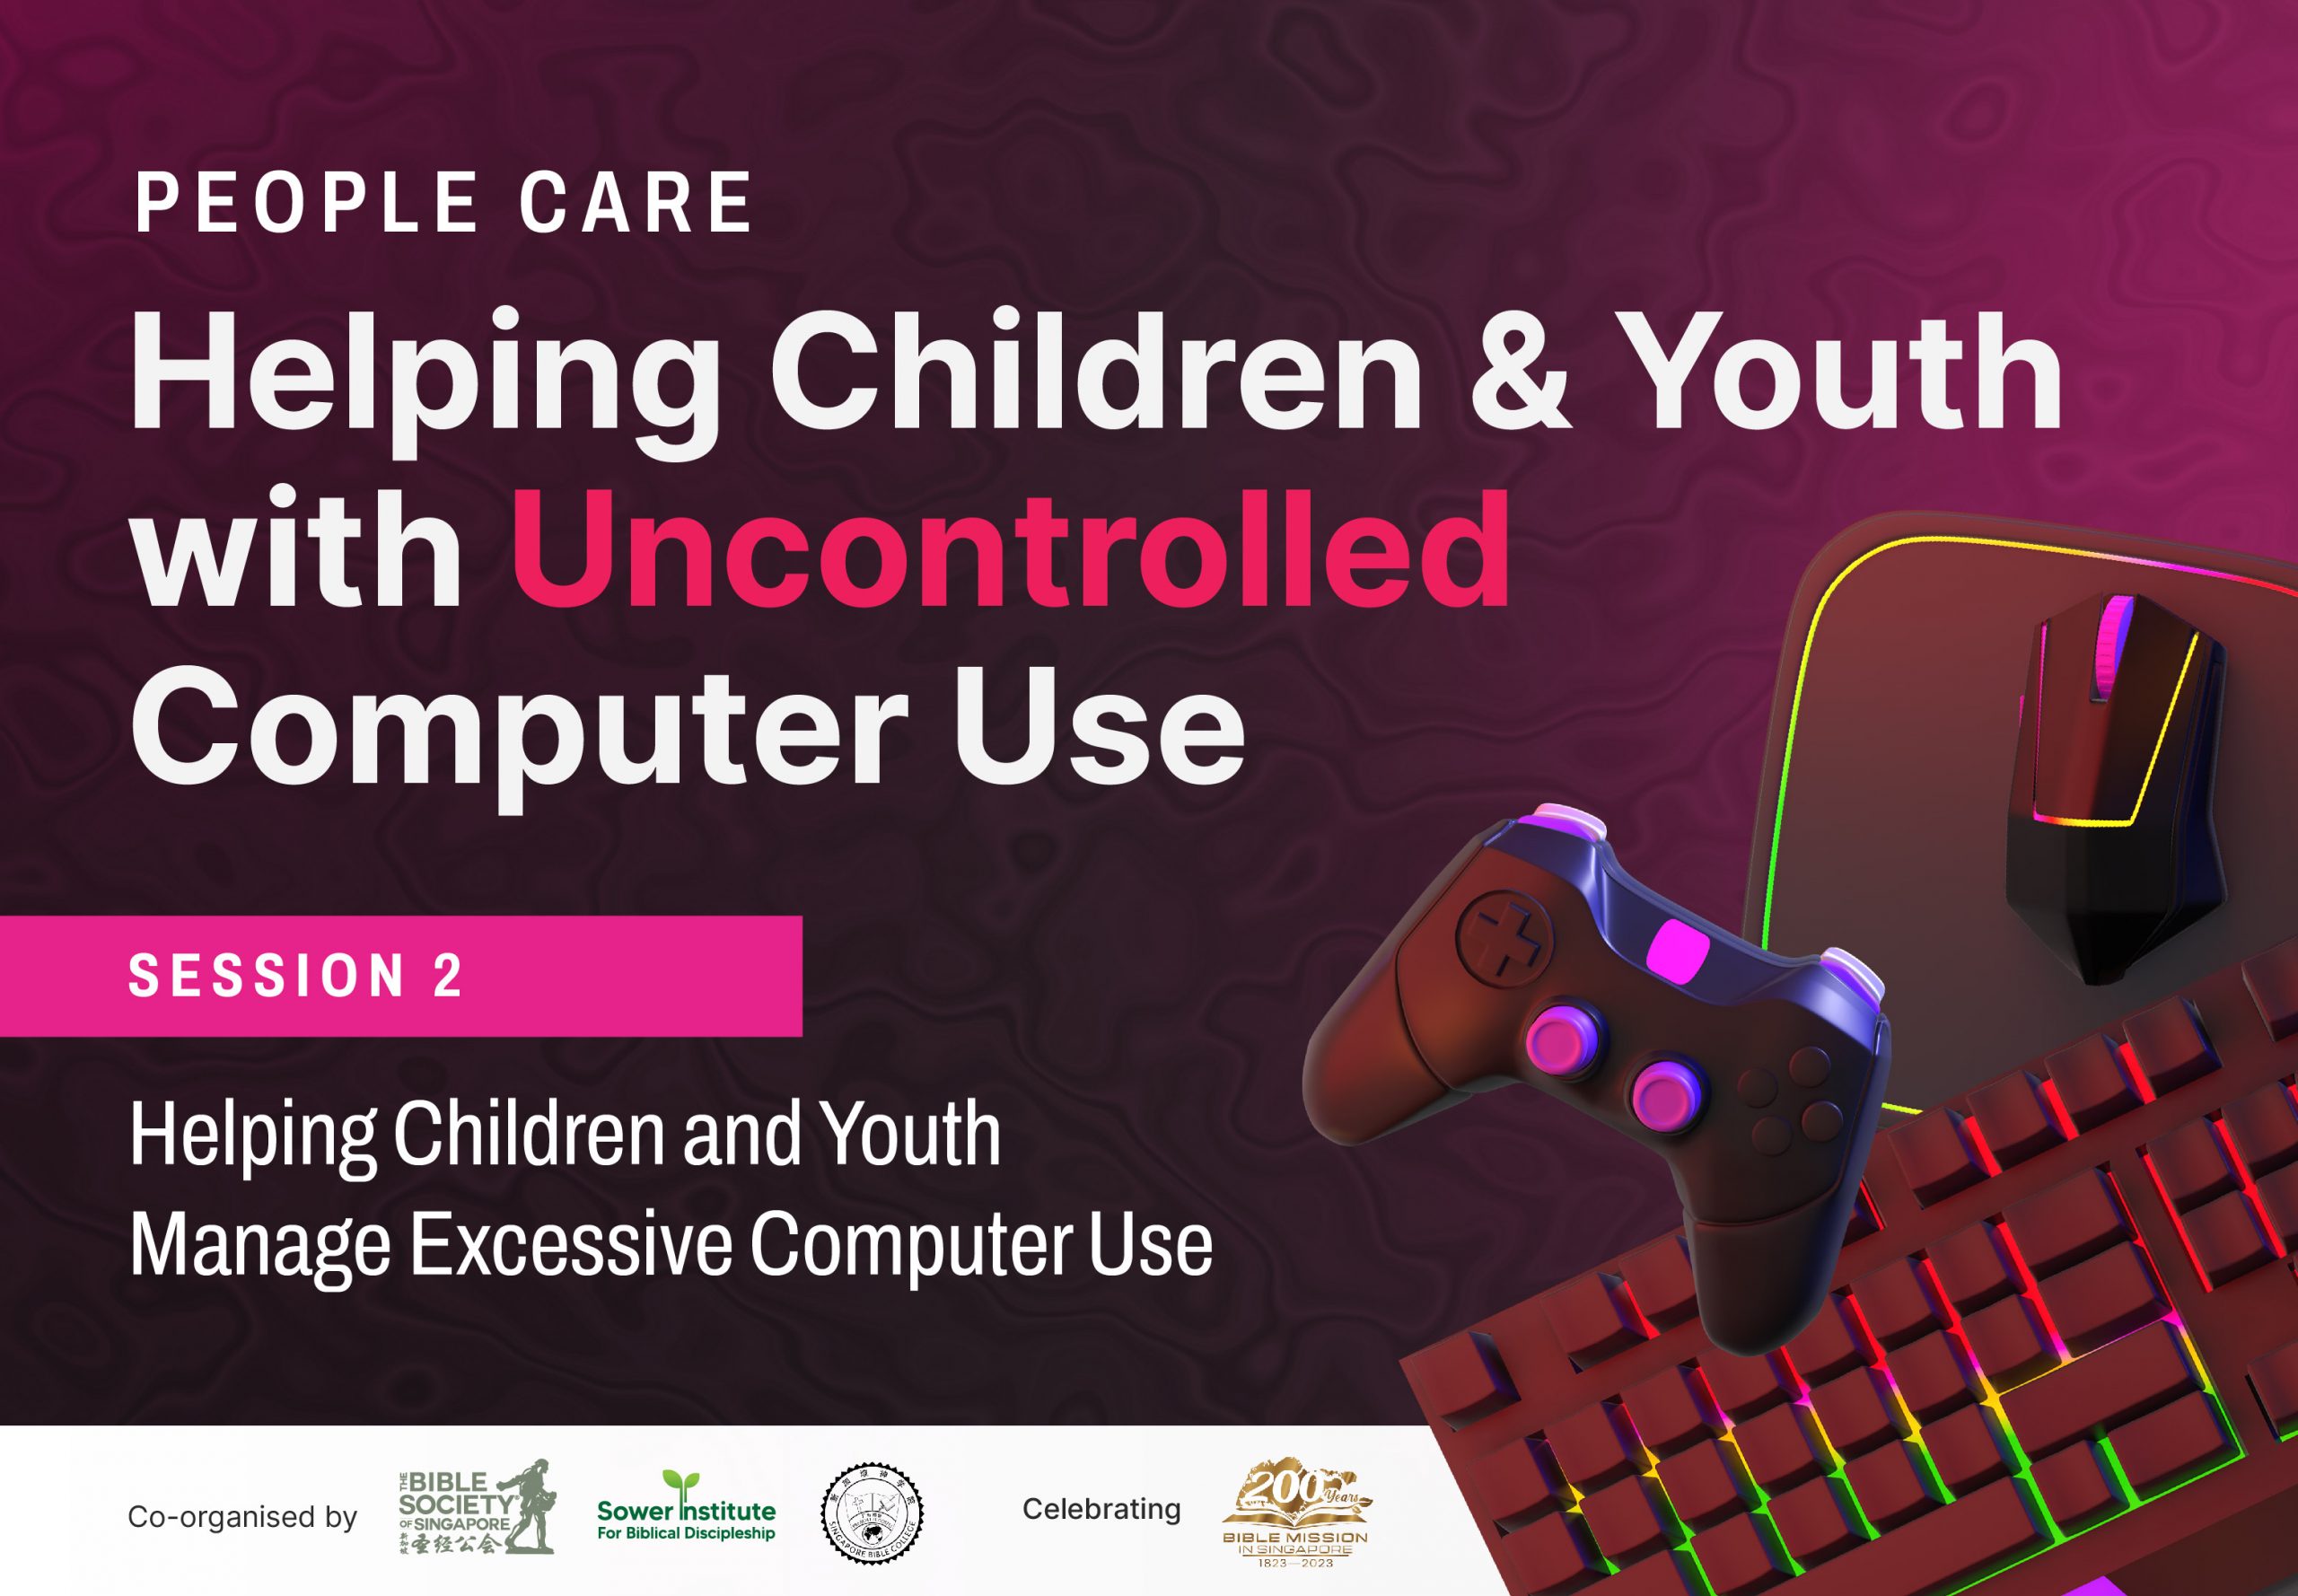 Helping Children and Youth Manage Excessive Computer Use